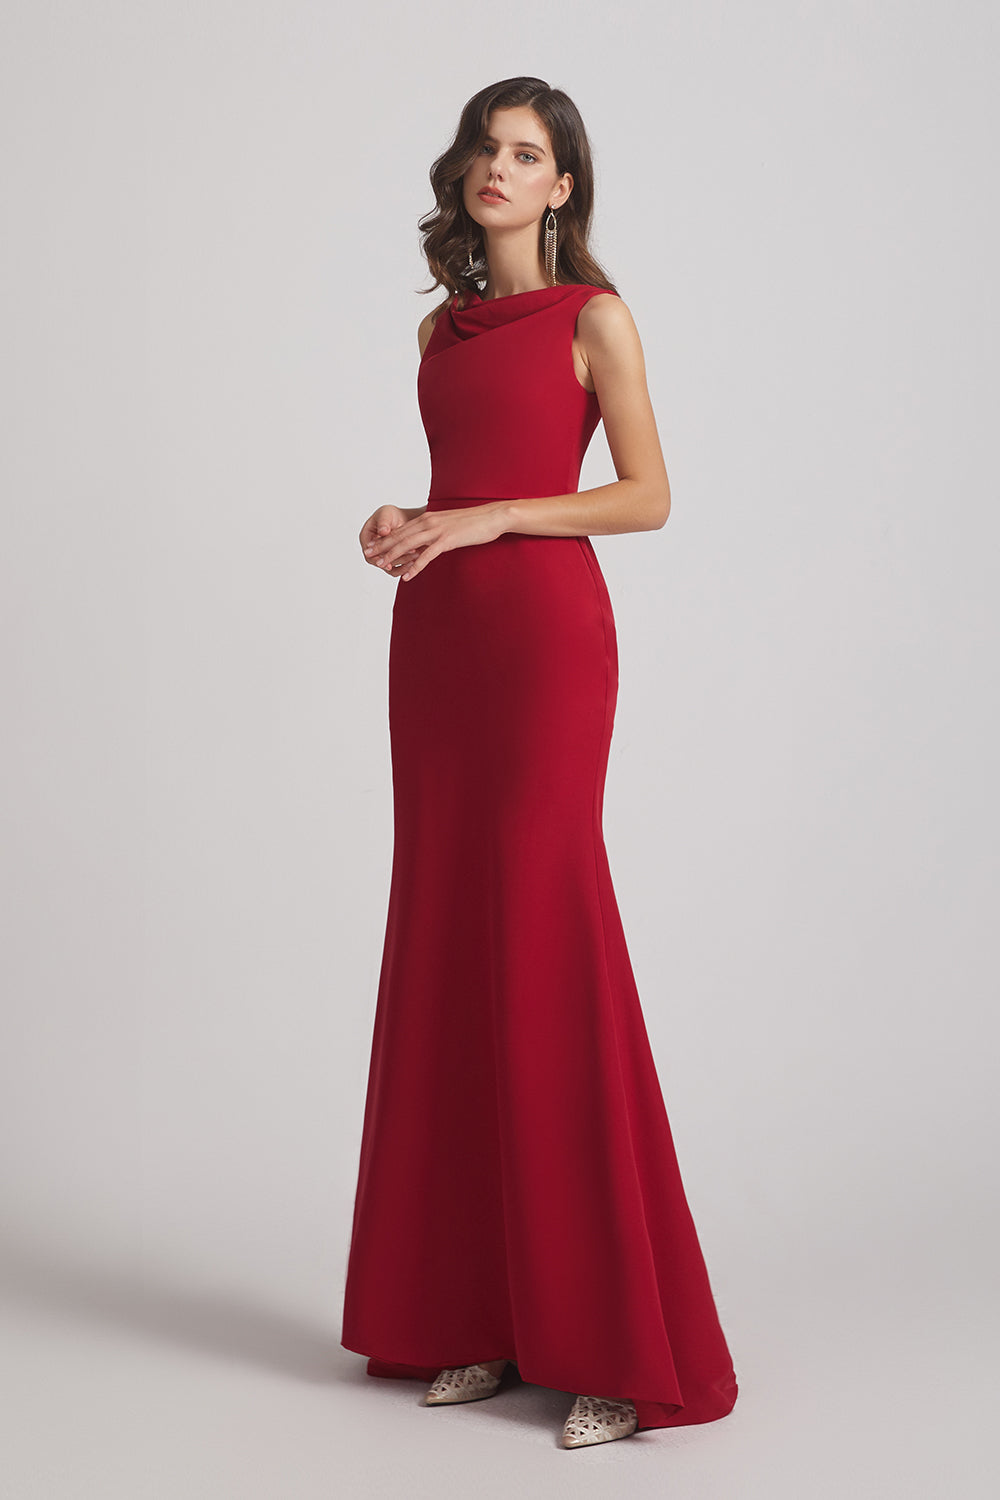 fit and flare sleeveless Bridesmaid Dresses